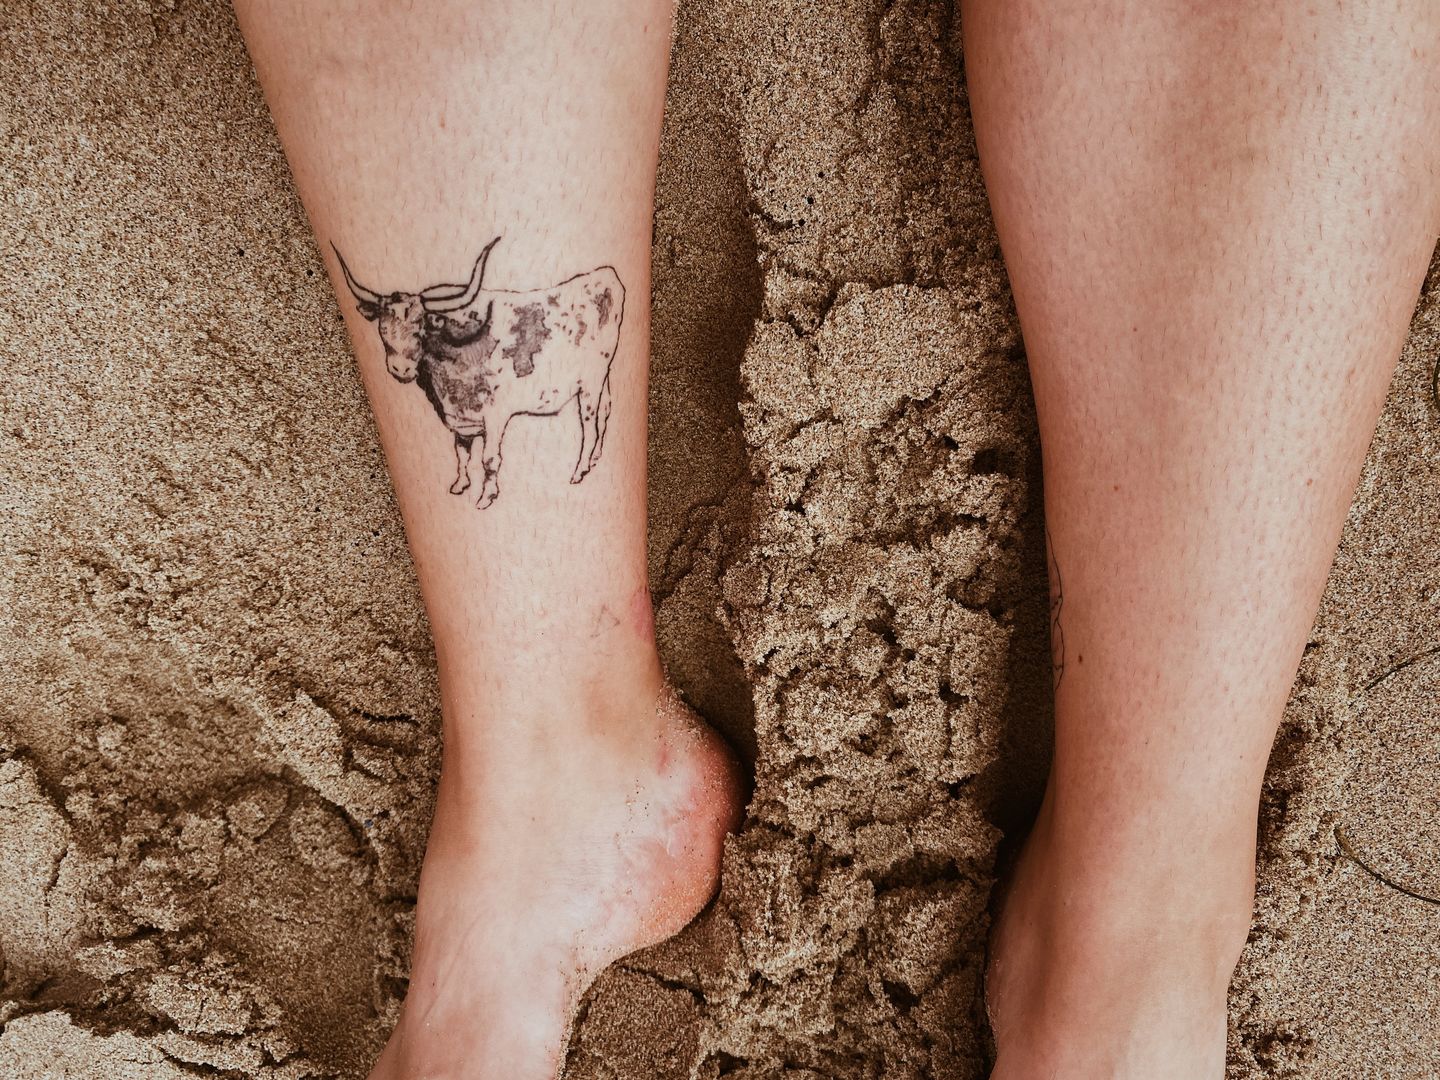 10 Cute Ankle Tattoos You'll Love - Society19